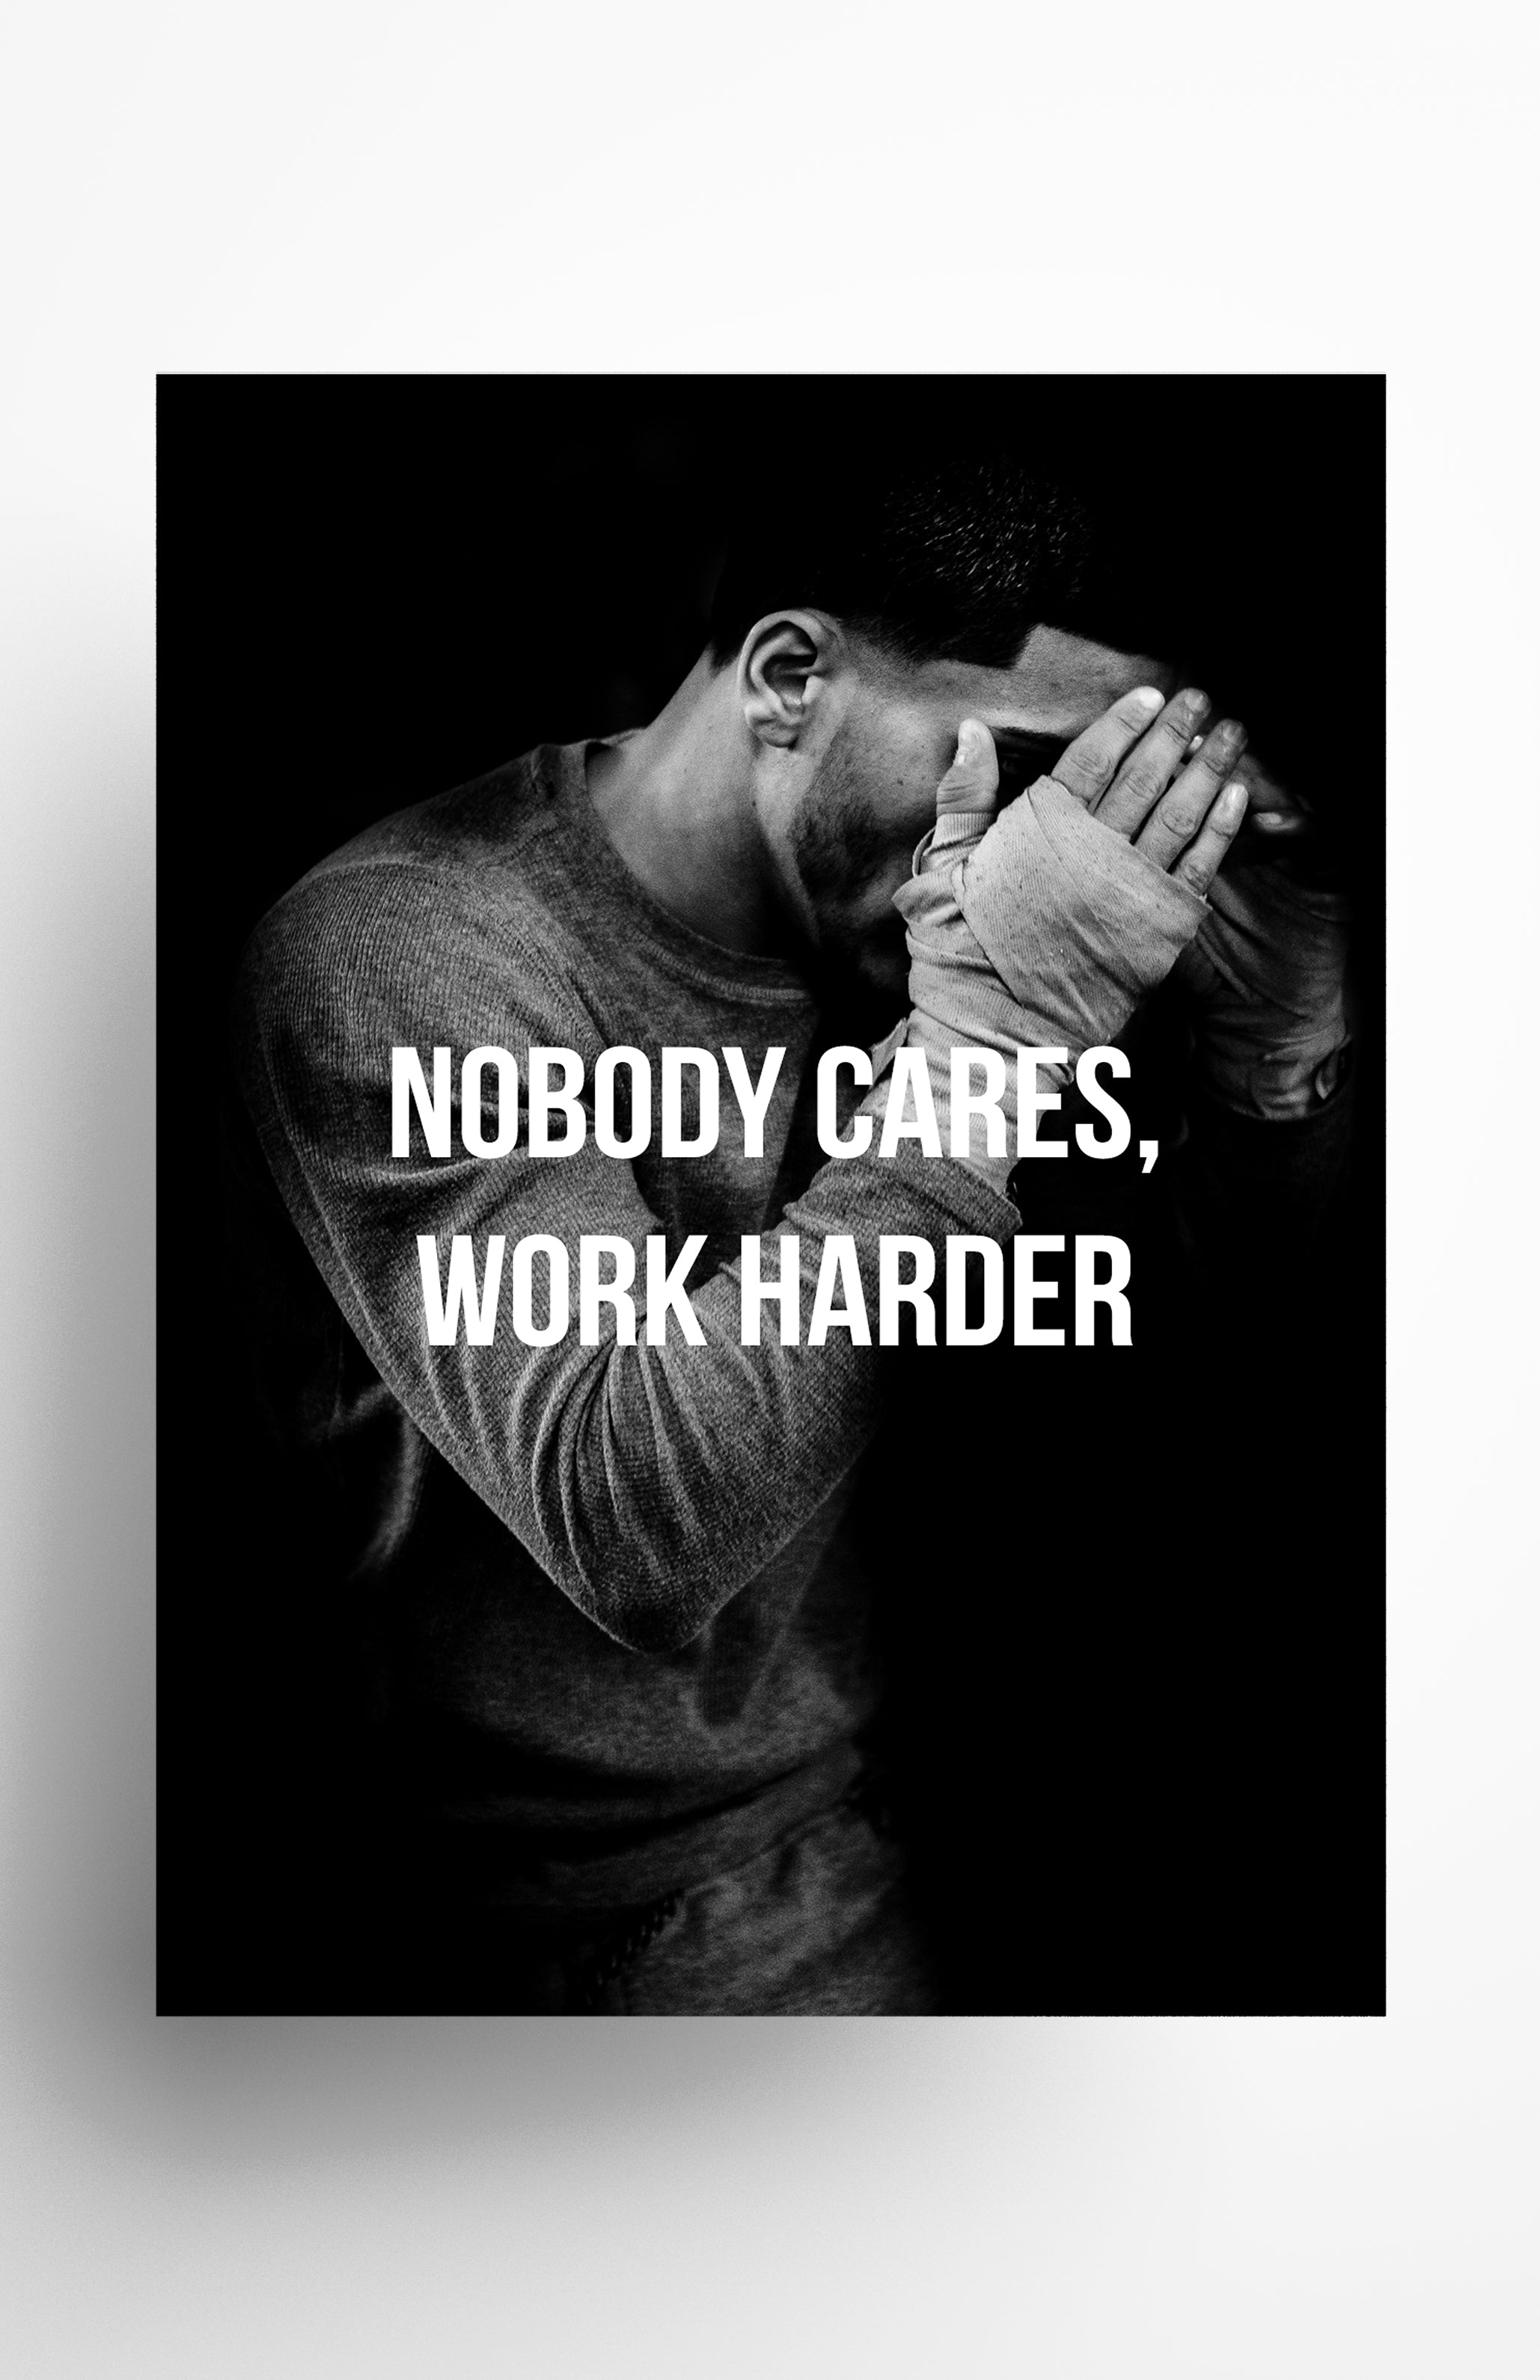 V3 Apparel womens Nobody Cares Work Harder, Motivational posters, mens inspirational wall artwork and empowering poster quote designs for office, home gym, school, kitchen and living room.